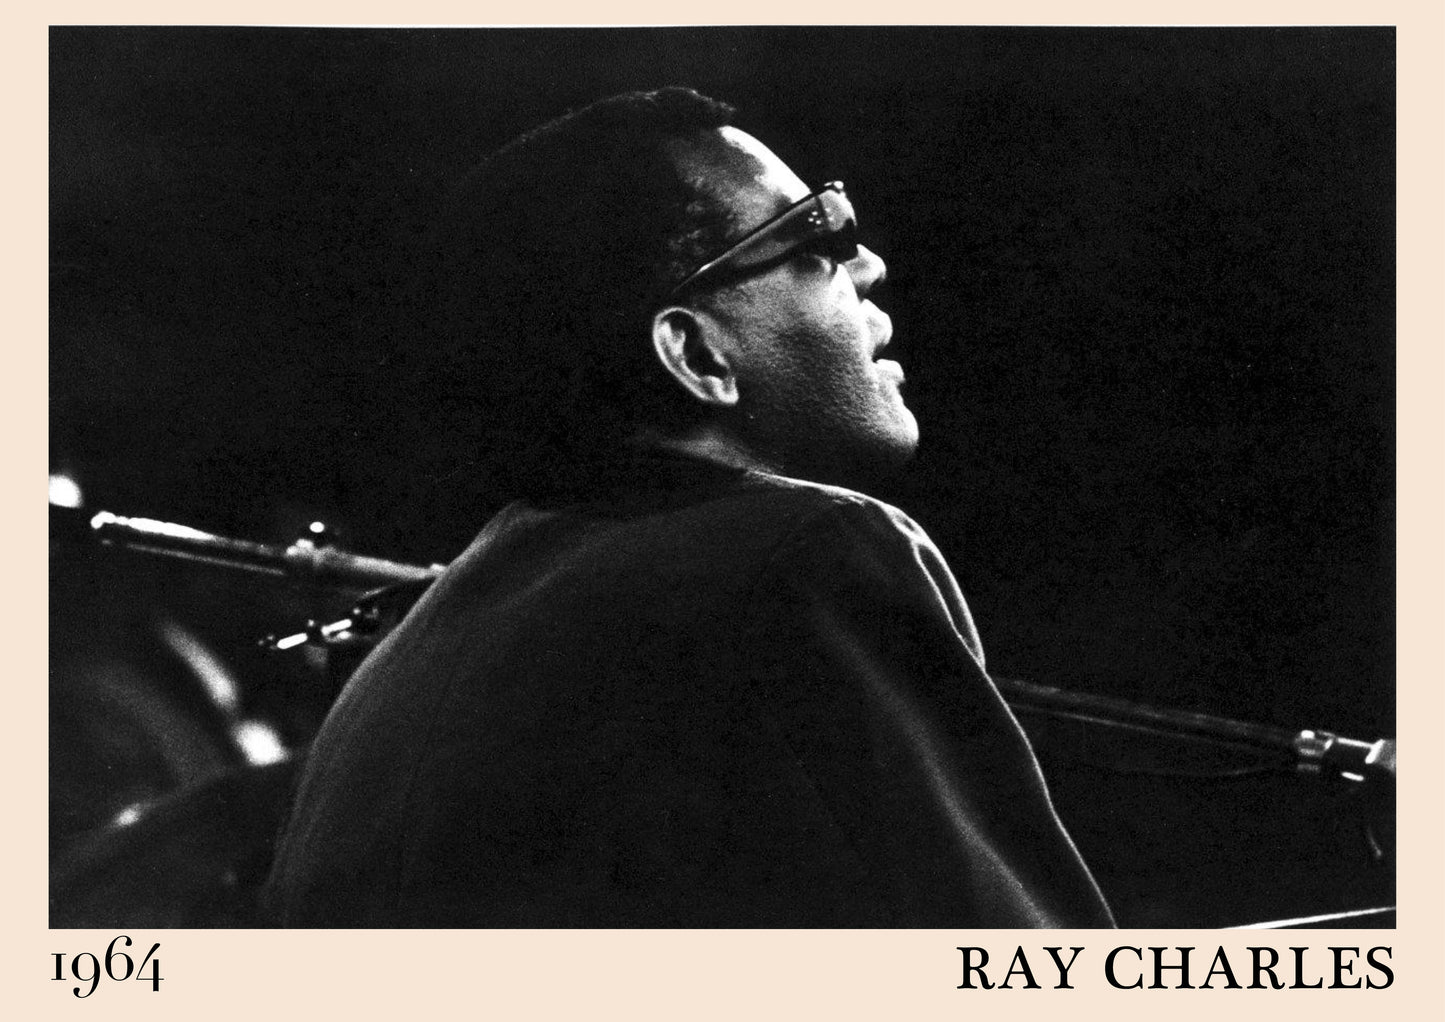  1964 photograph of blues legend Ray Charles, transformed into a cool poster